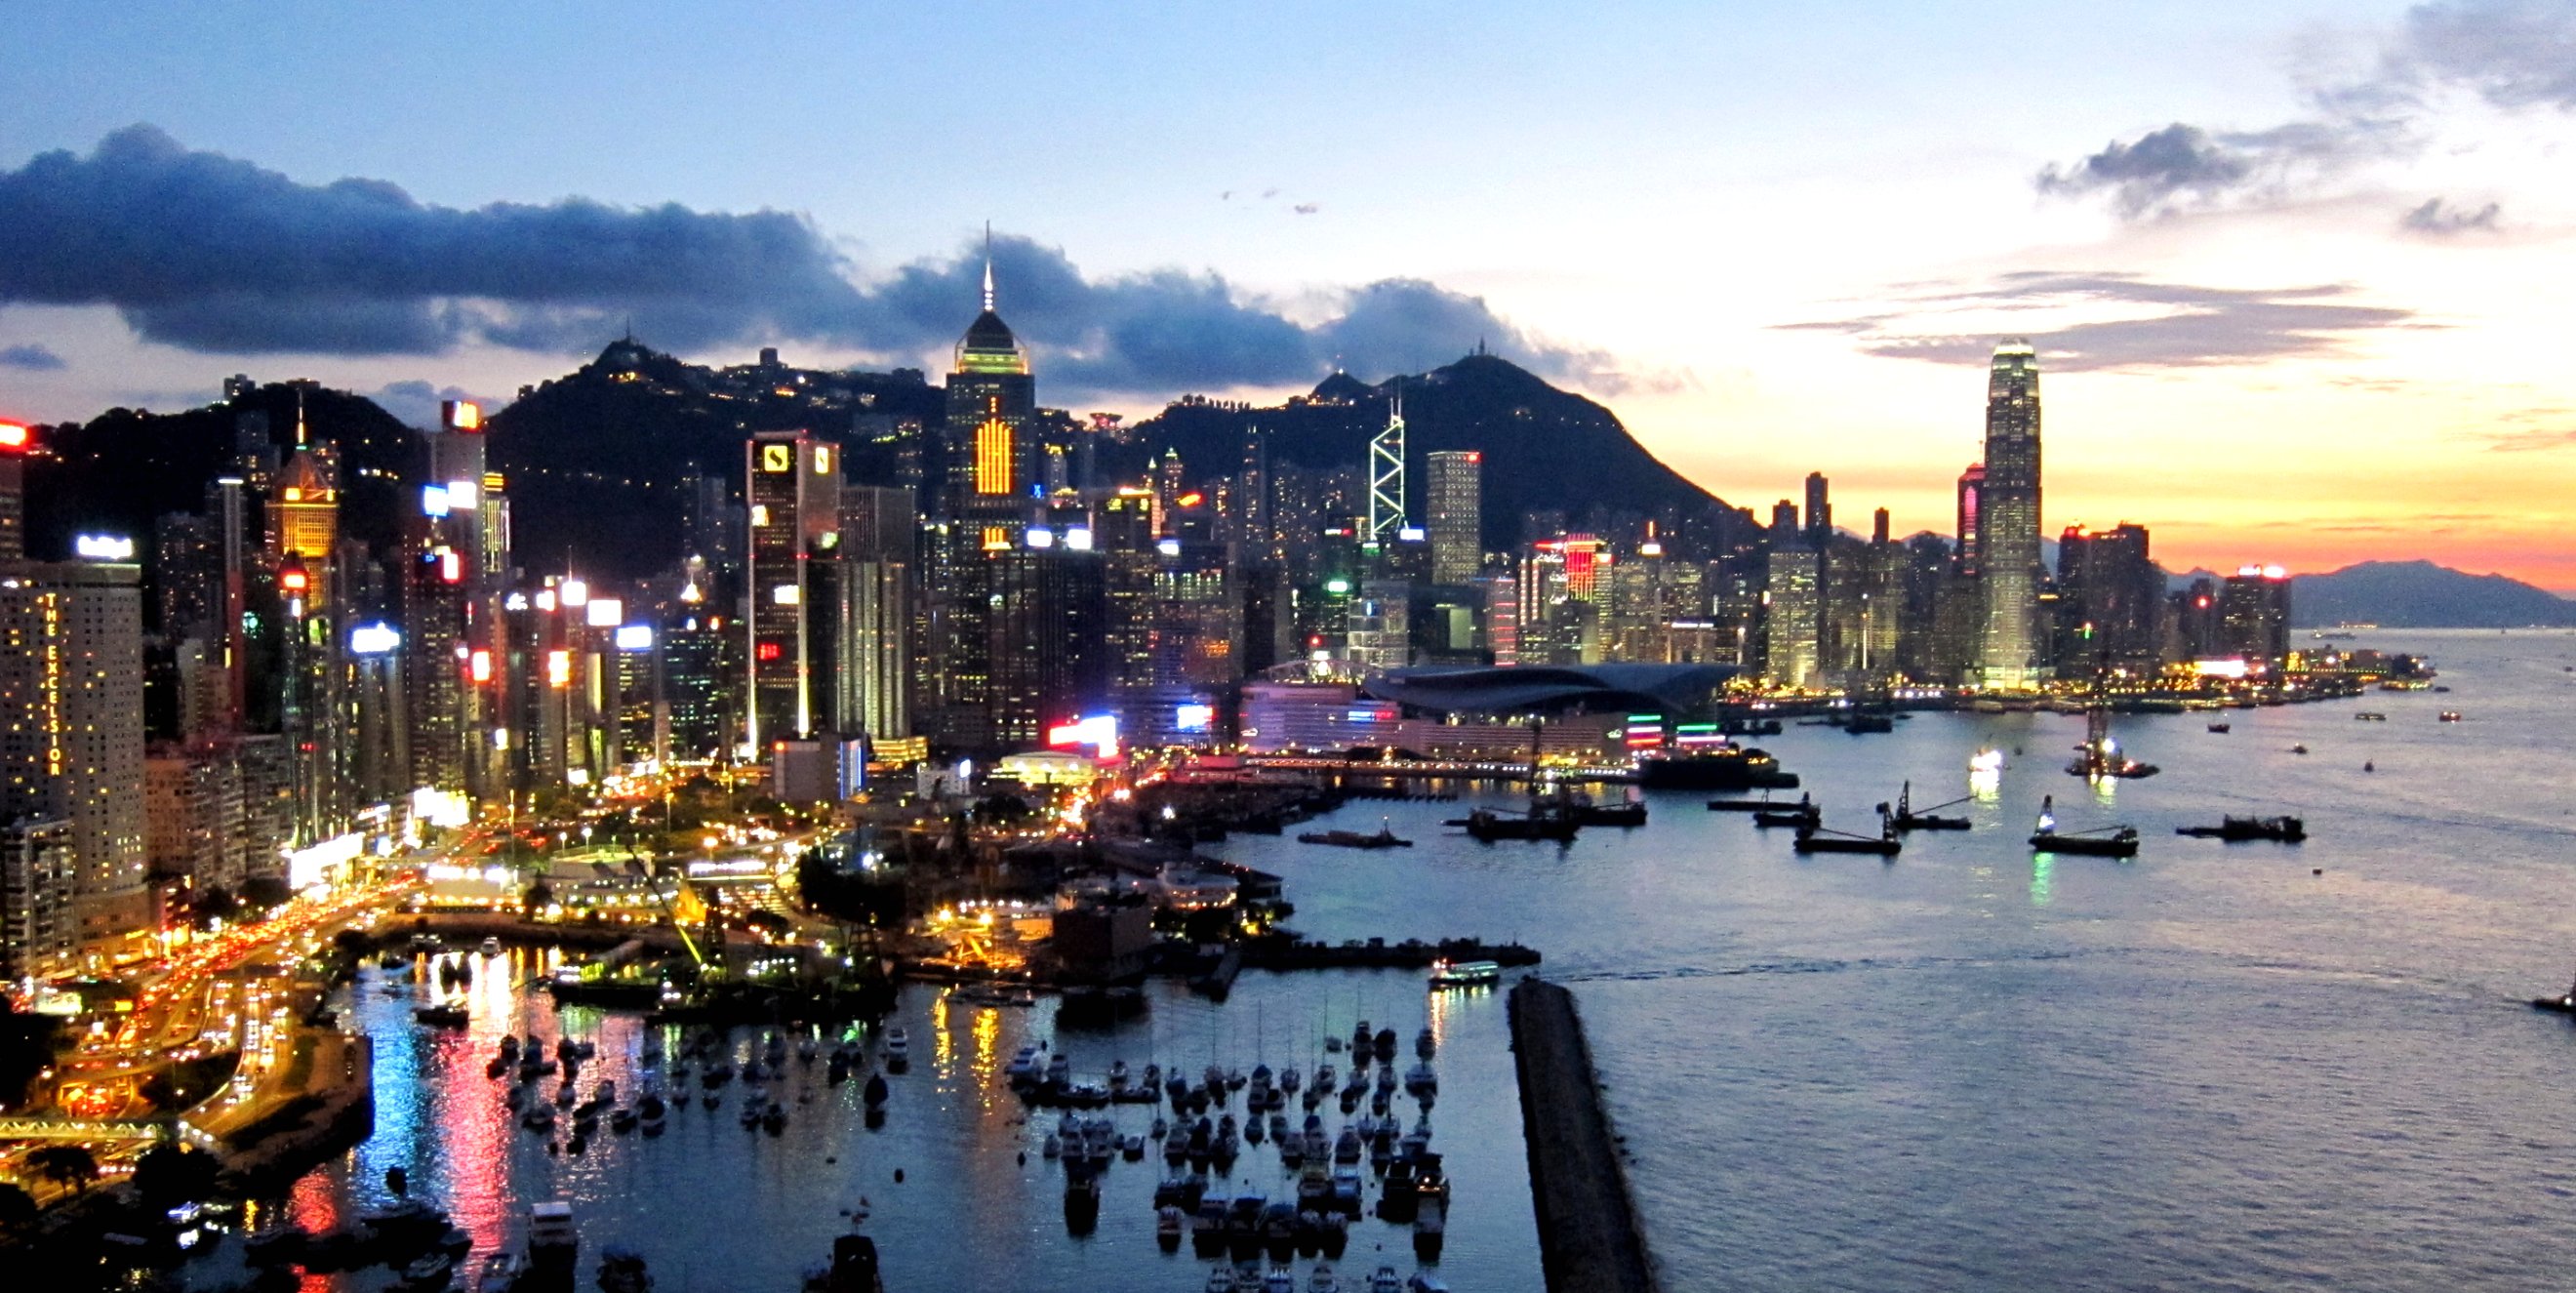 Hong Kong Island as seen from North Point. Photo taken on August 5, 2011.